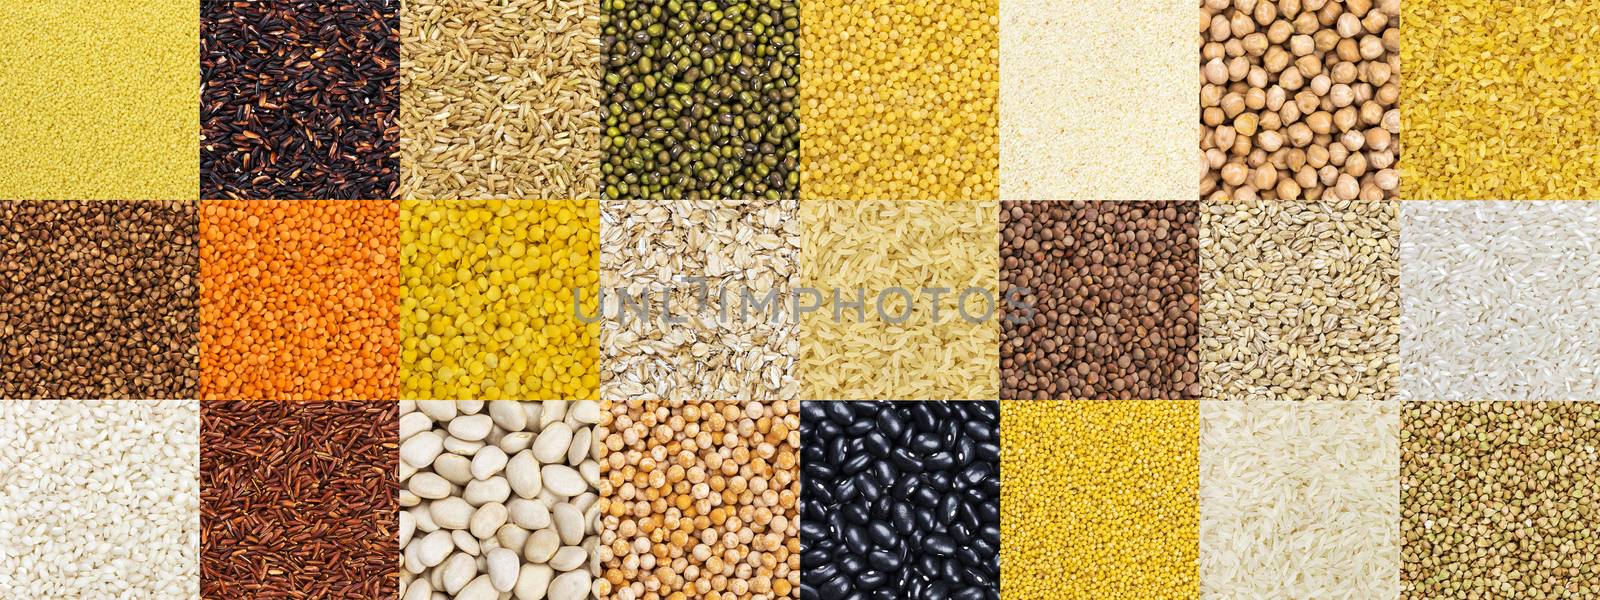 Big Collection of different groats backgrounds, cereals textures collection. Closeup